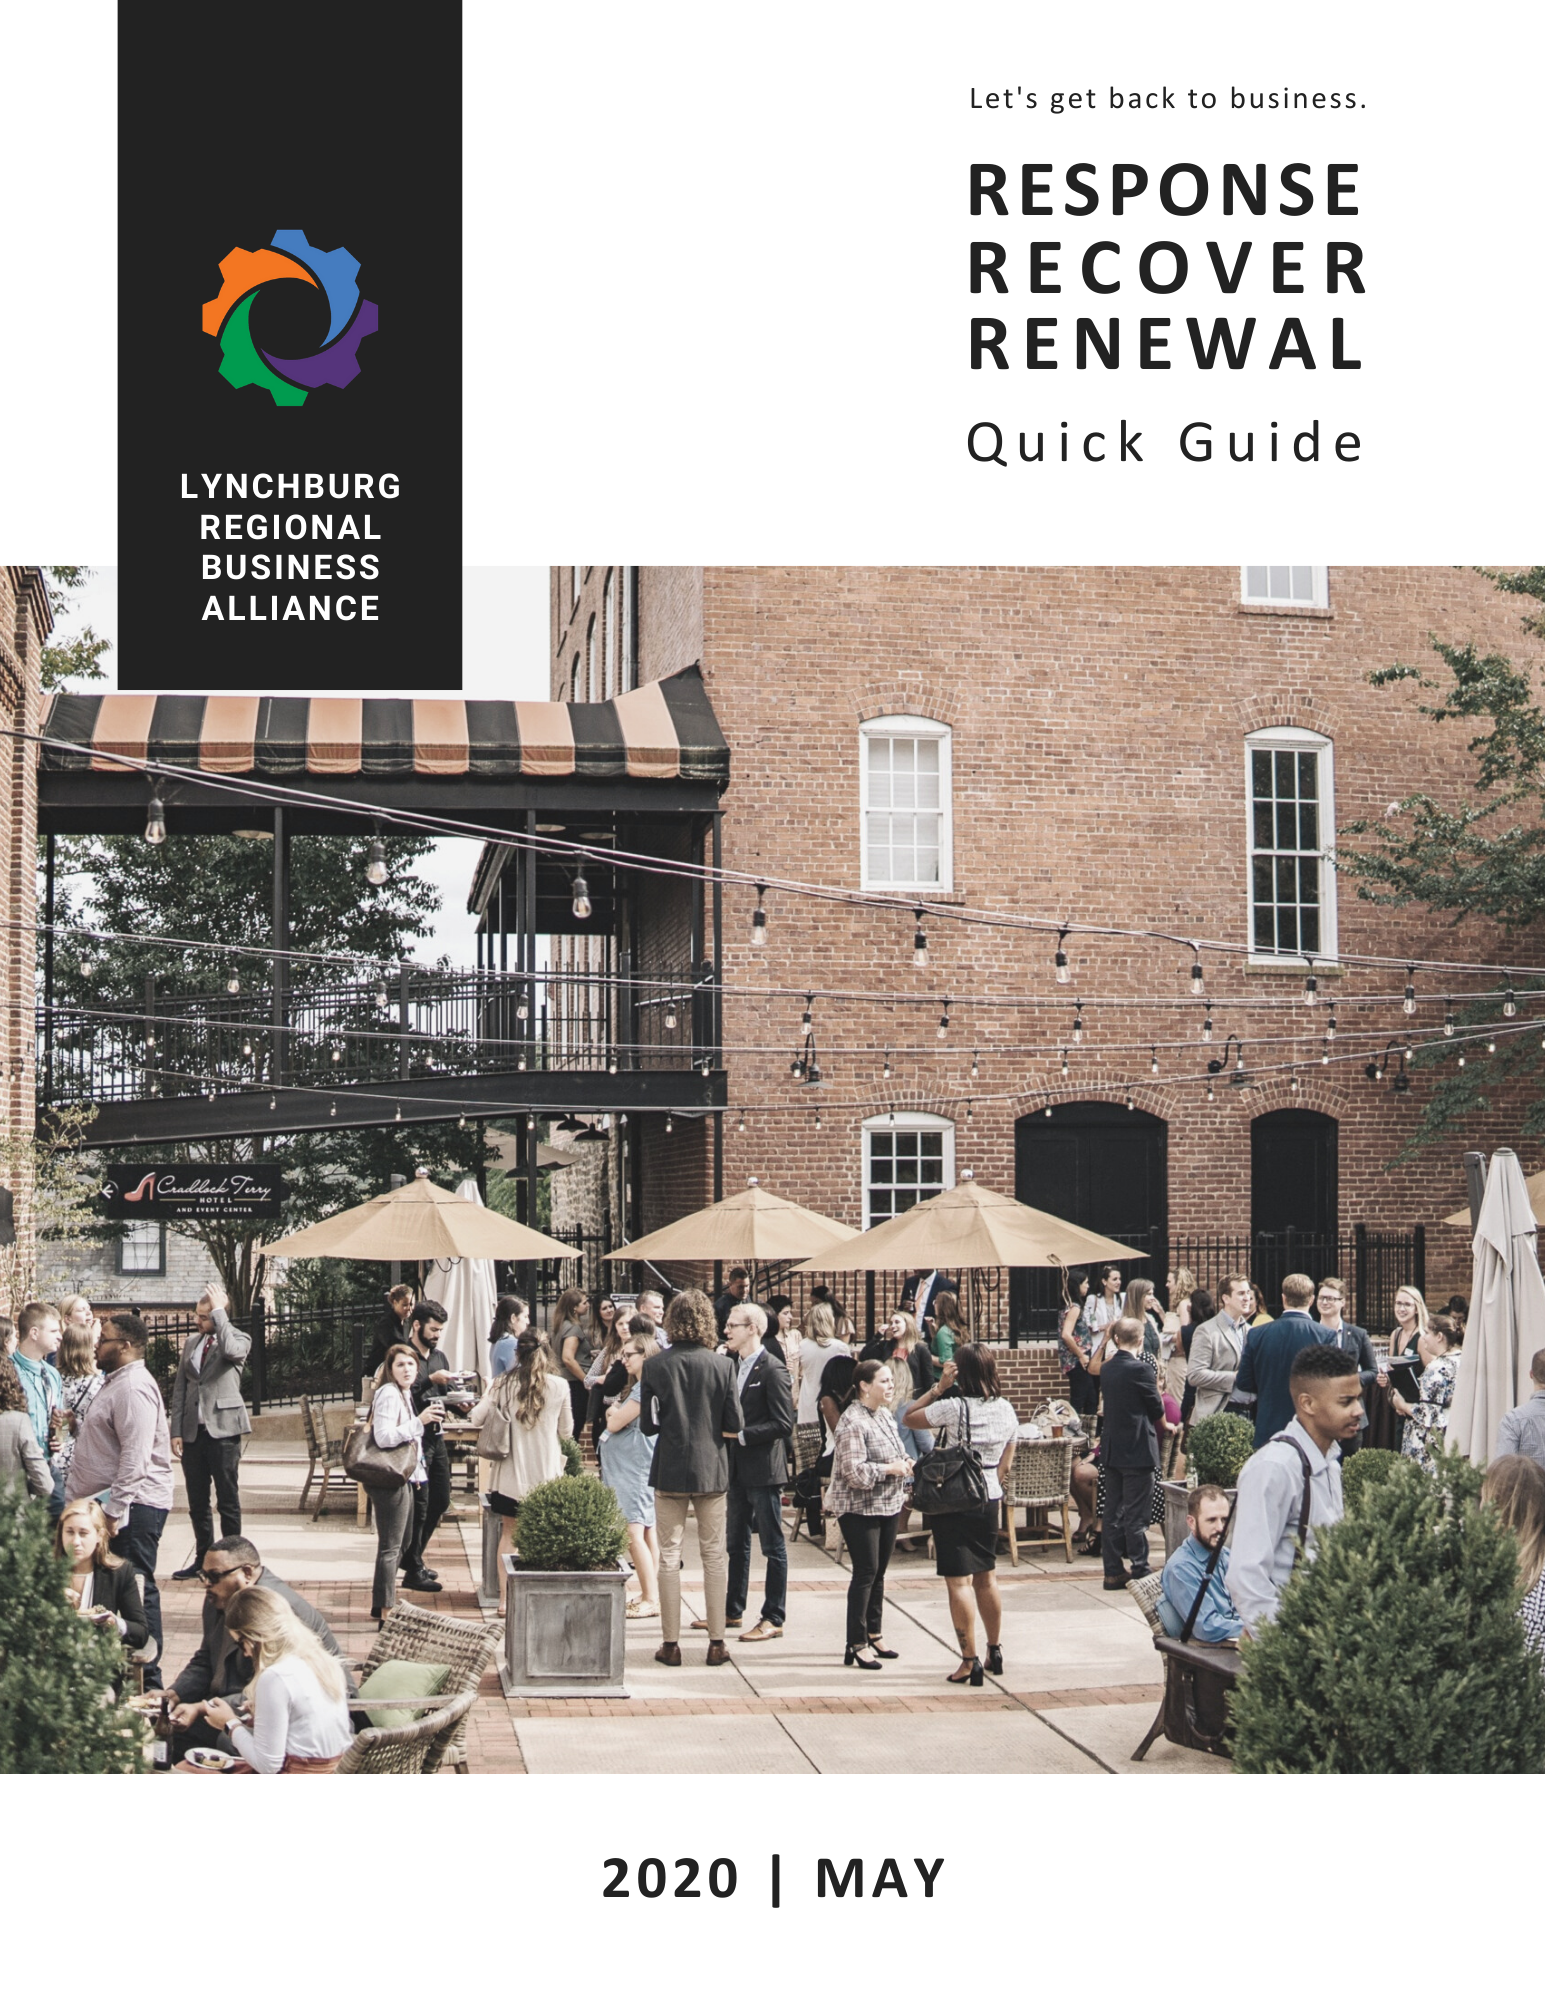 Response, Recover, Renewal Quick Guide